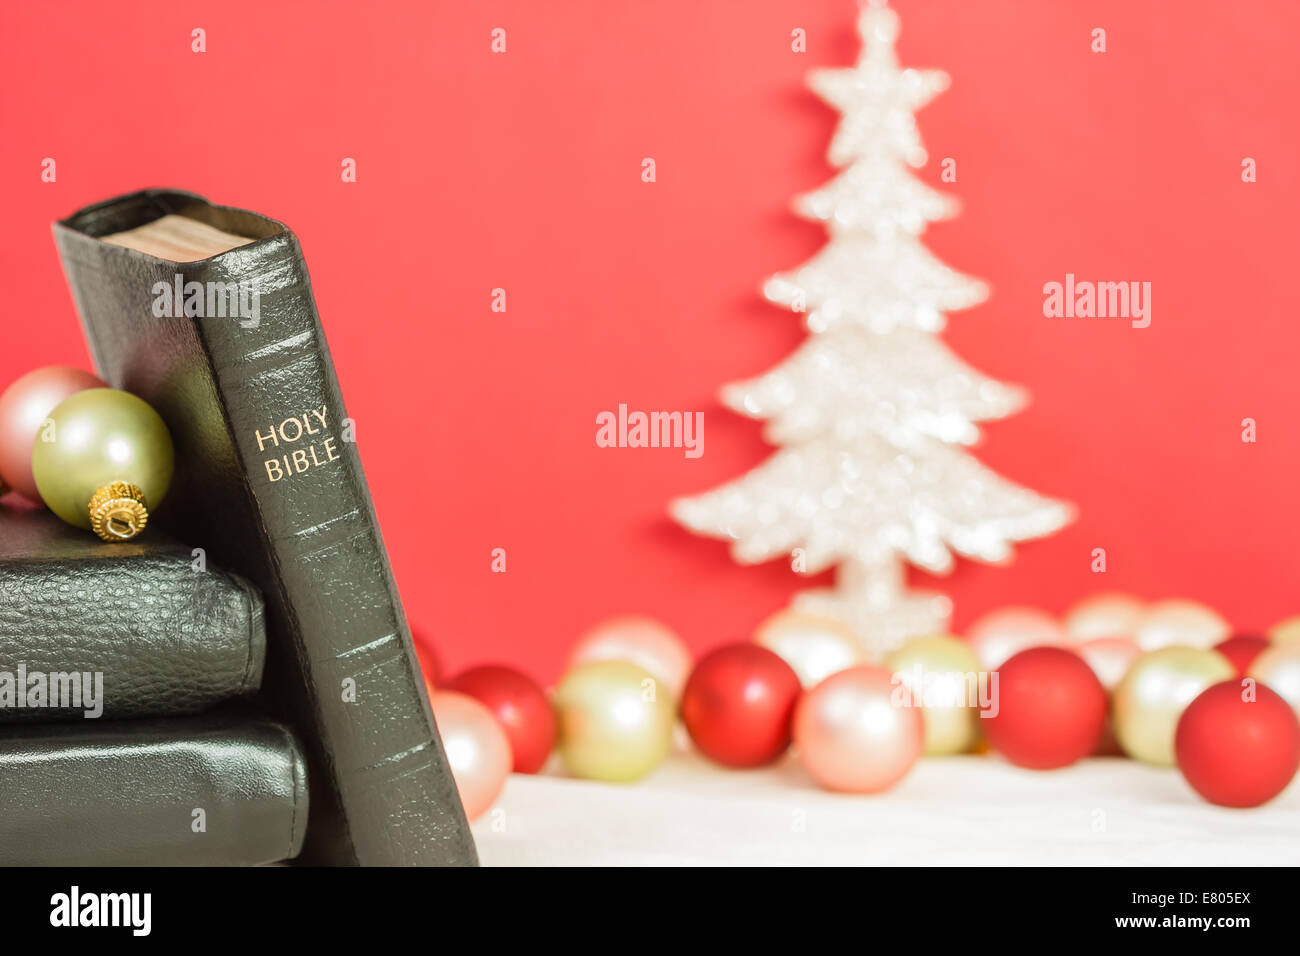 A sharply focused Holy Bible with Christmas tree and ornaments against red background. Can be used for Christmas Bible passages. Stock Photo